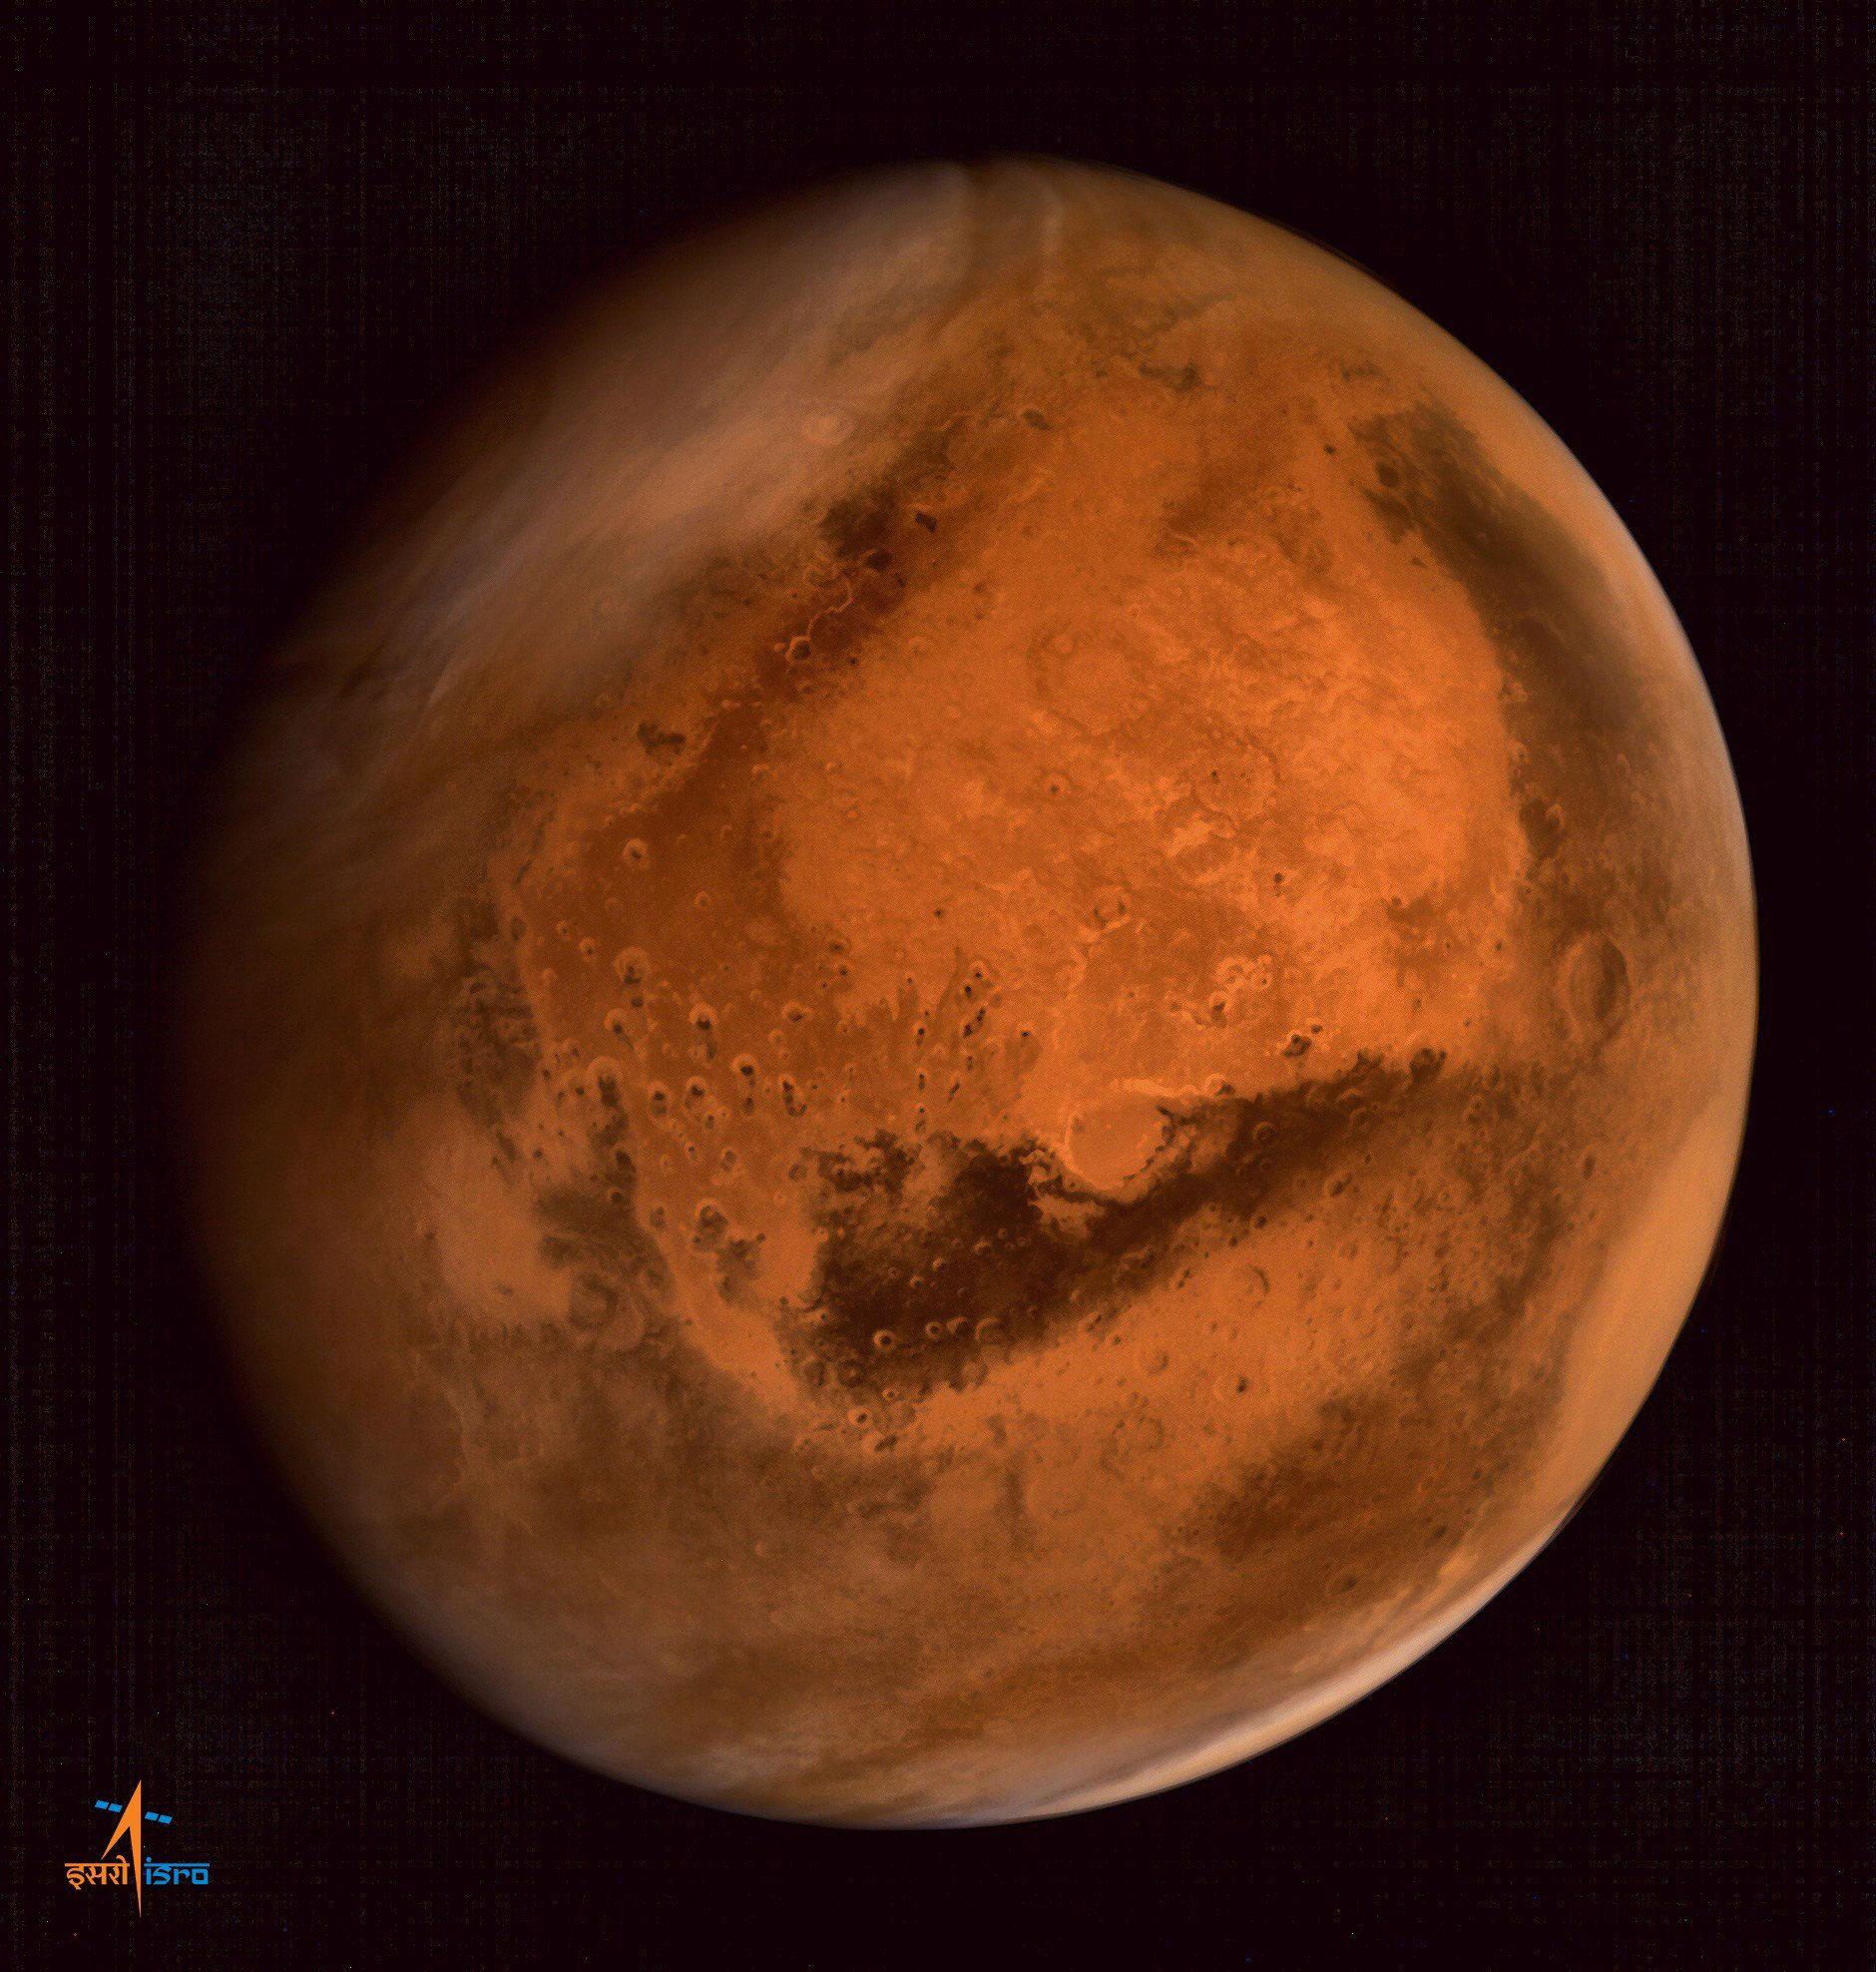 Mars photographed by the ISRO Mars Orbiter Mission (MOM) spacecraft on Sept. 30, 2014. (ISRO—AFP/Getty Images)